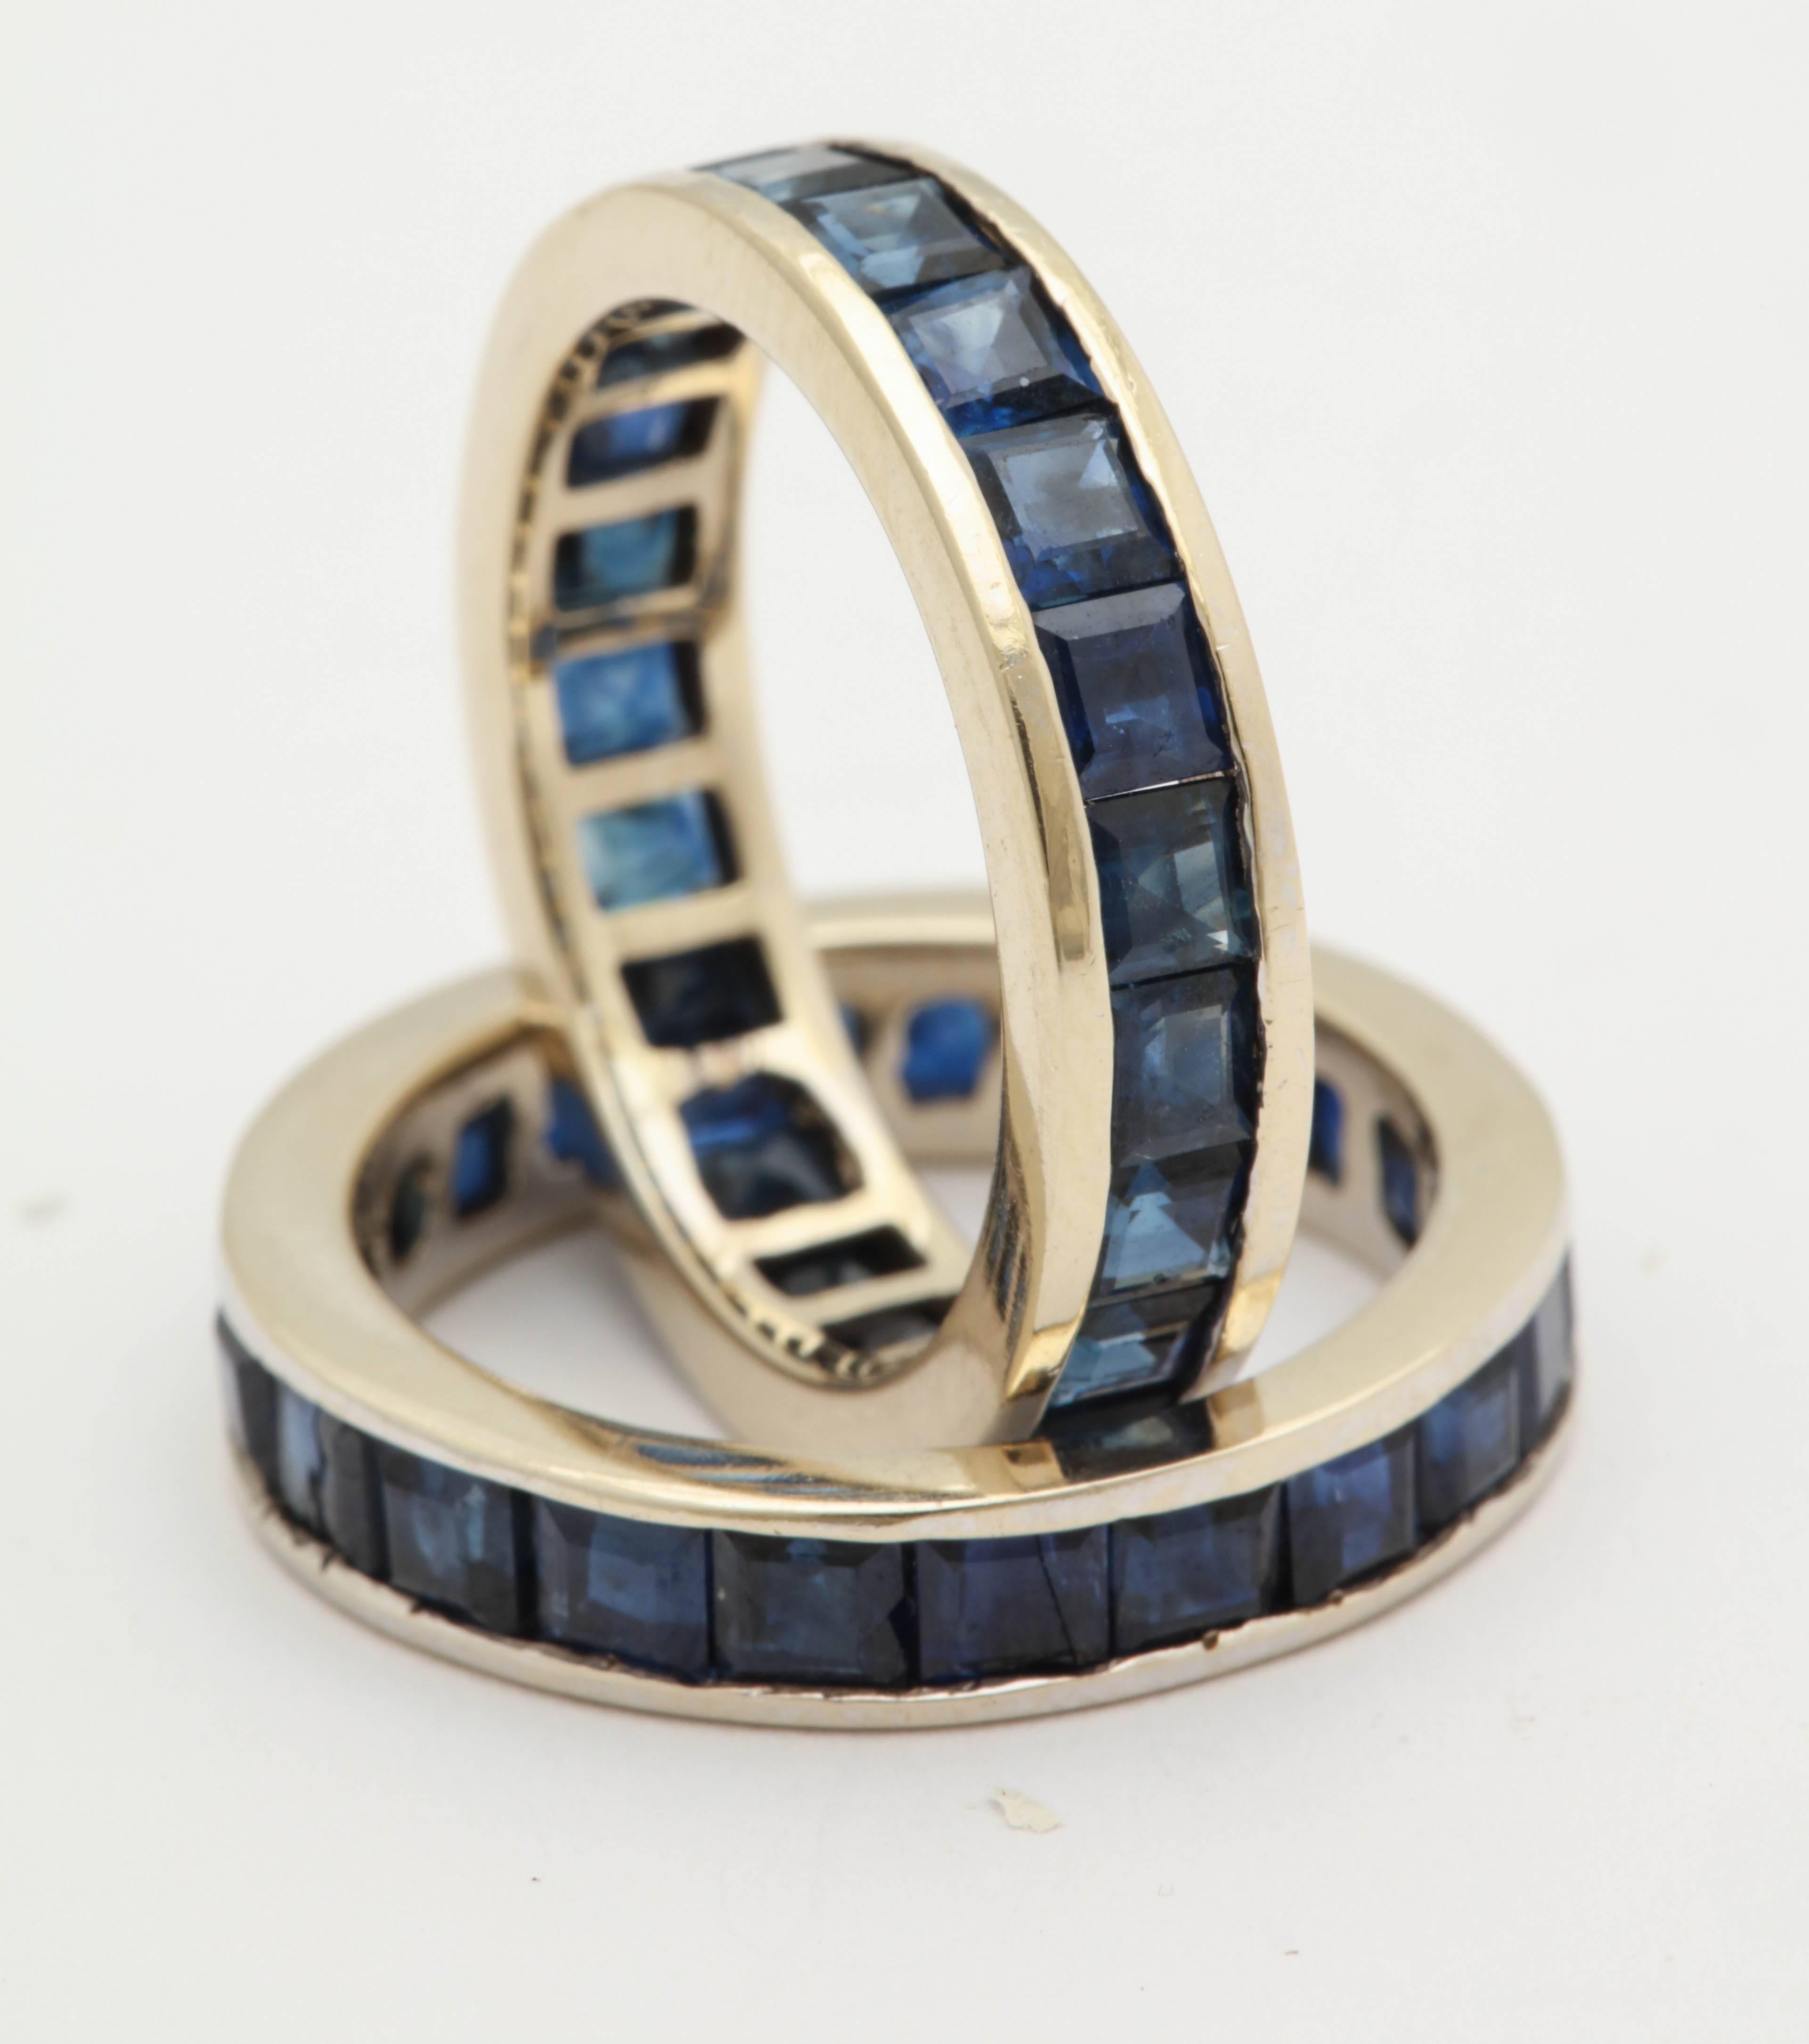 One Pair Of Ladies Deep Blue Color Eternity Bands Size 7 ,Designed With 5 Carats Of Square Blue Sapphires All The Way Around The Bands. Set In 14kt White Gold . 